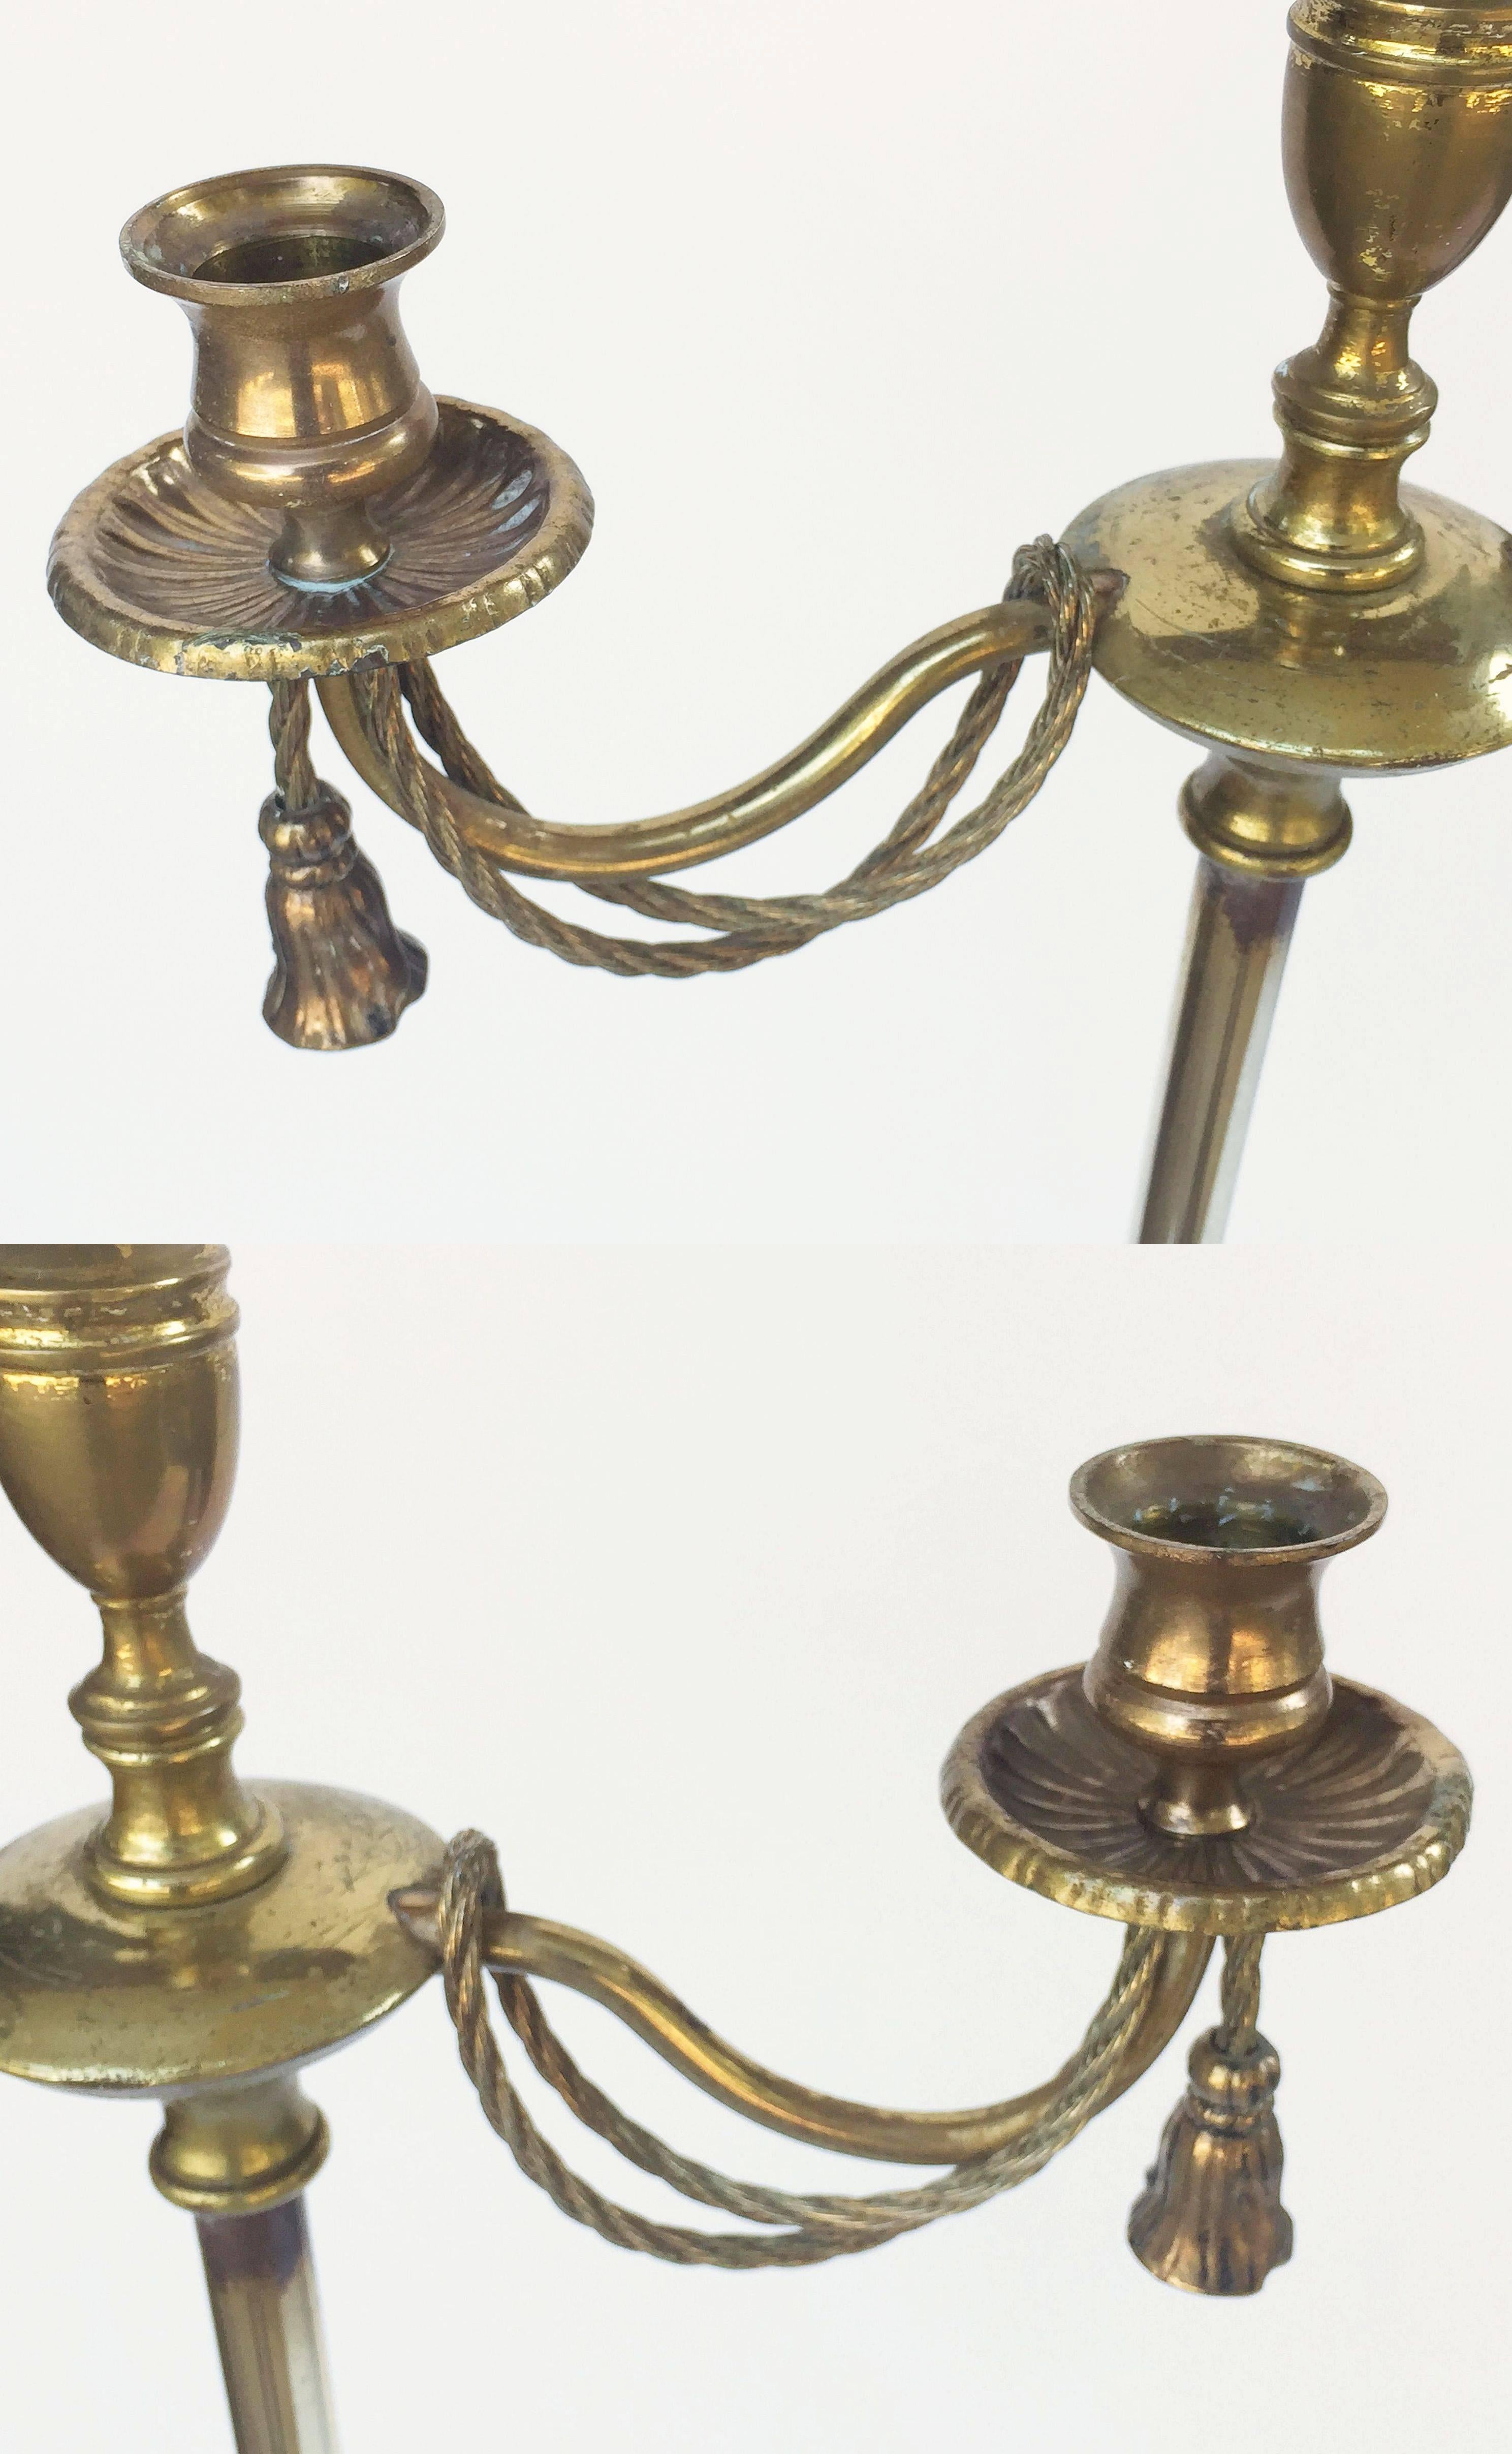 Regency Floor-Standing Candleholder or Candelabra of Brass from England In Good Condition For Sale In Austin, TX